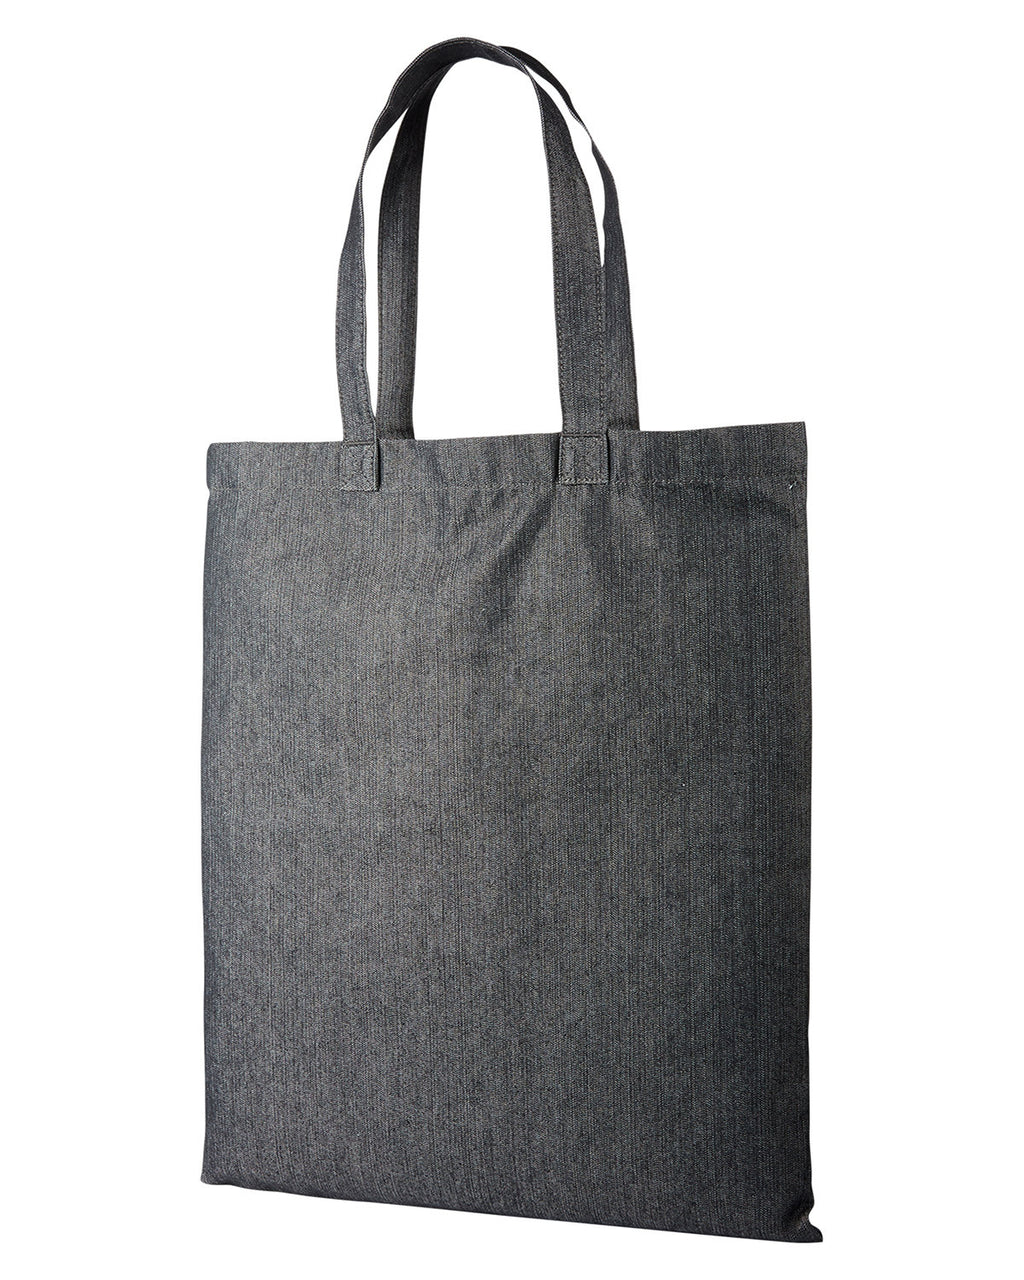 RP998-Artisan Collection by Reprime Denim Tote Bag